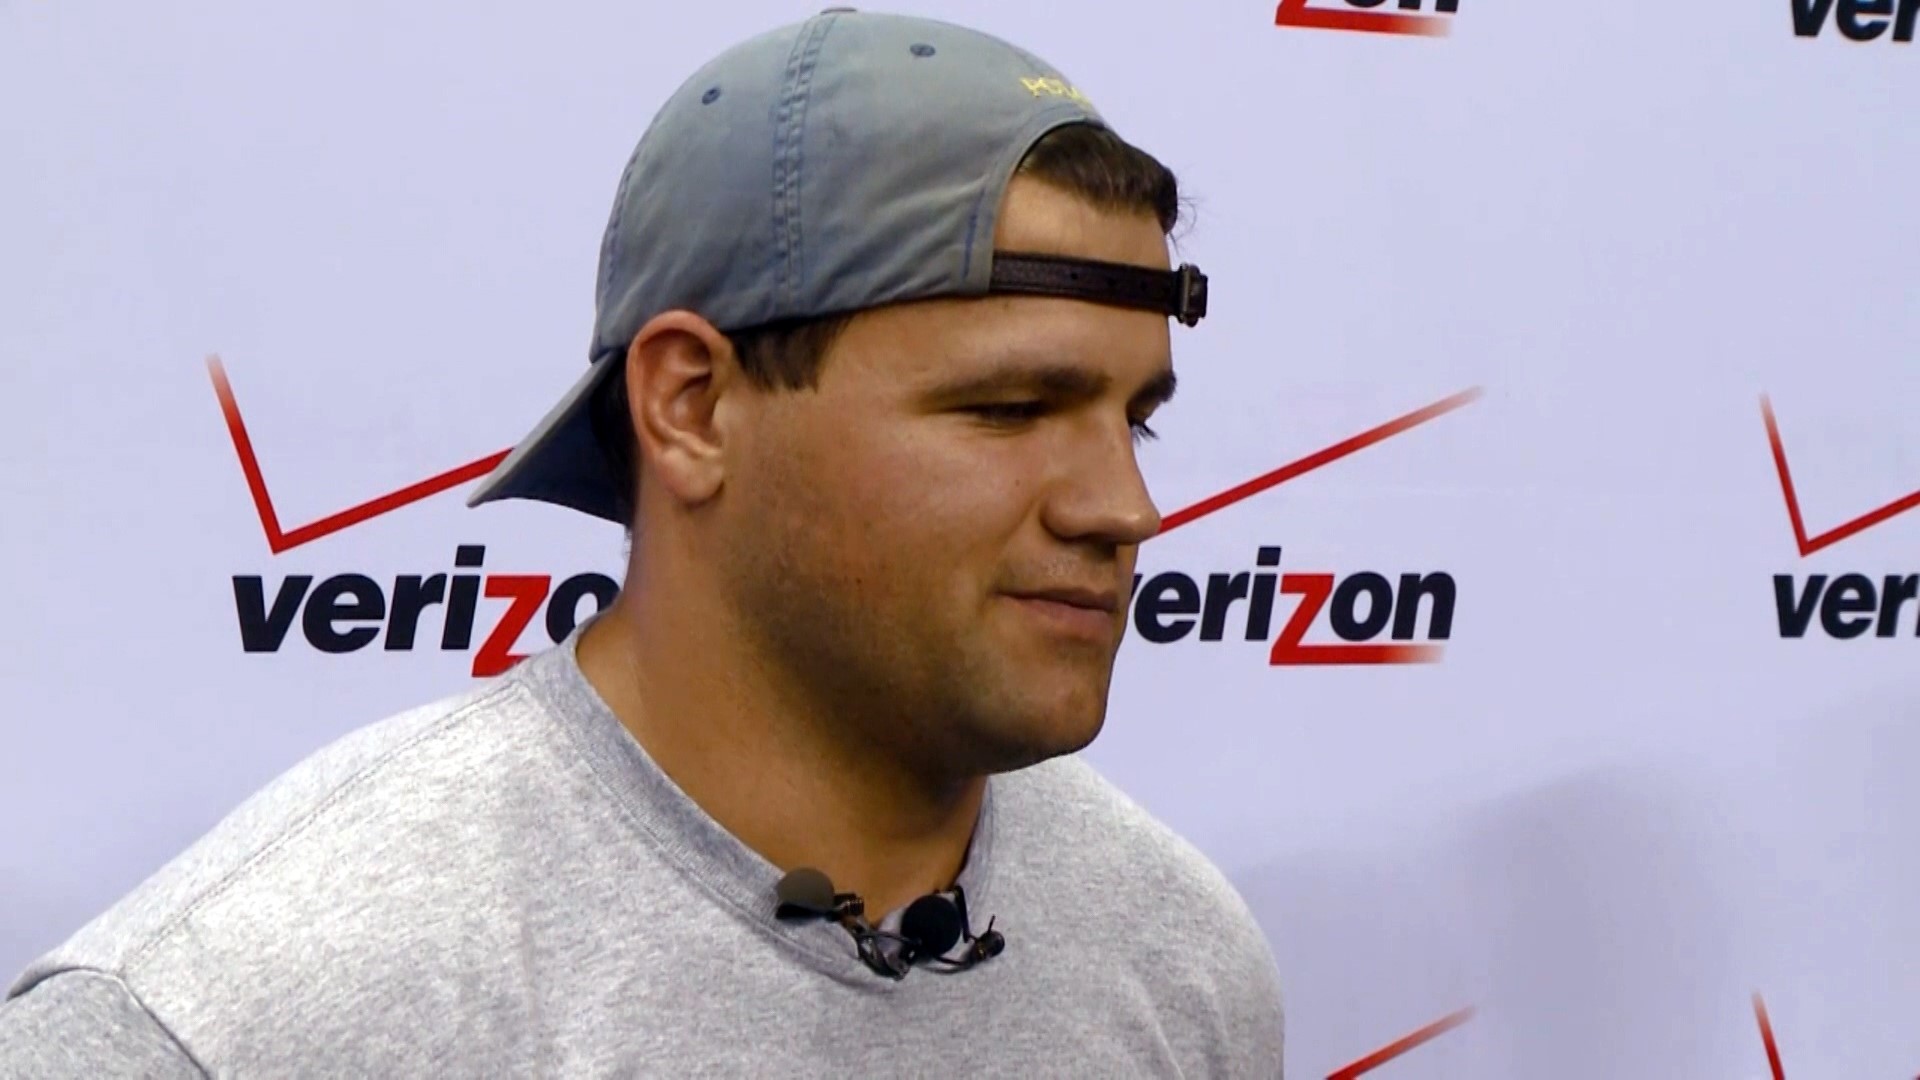 Peyton Hillis reportedly saved his family from drowning and was hospitalized.